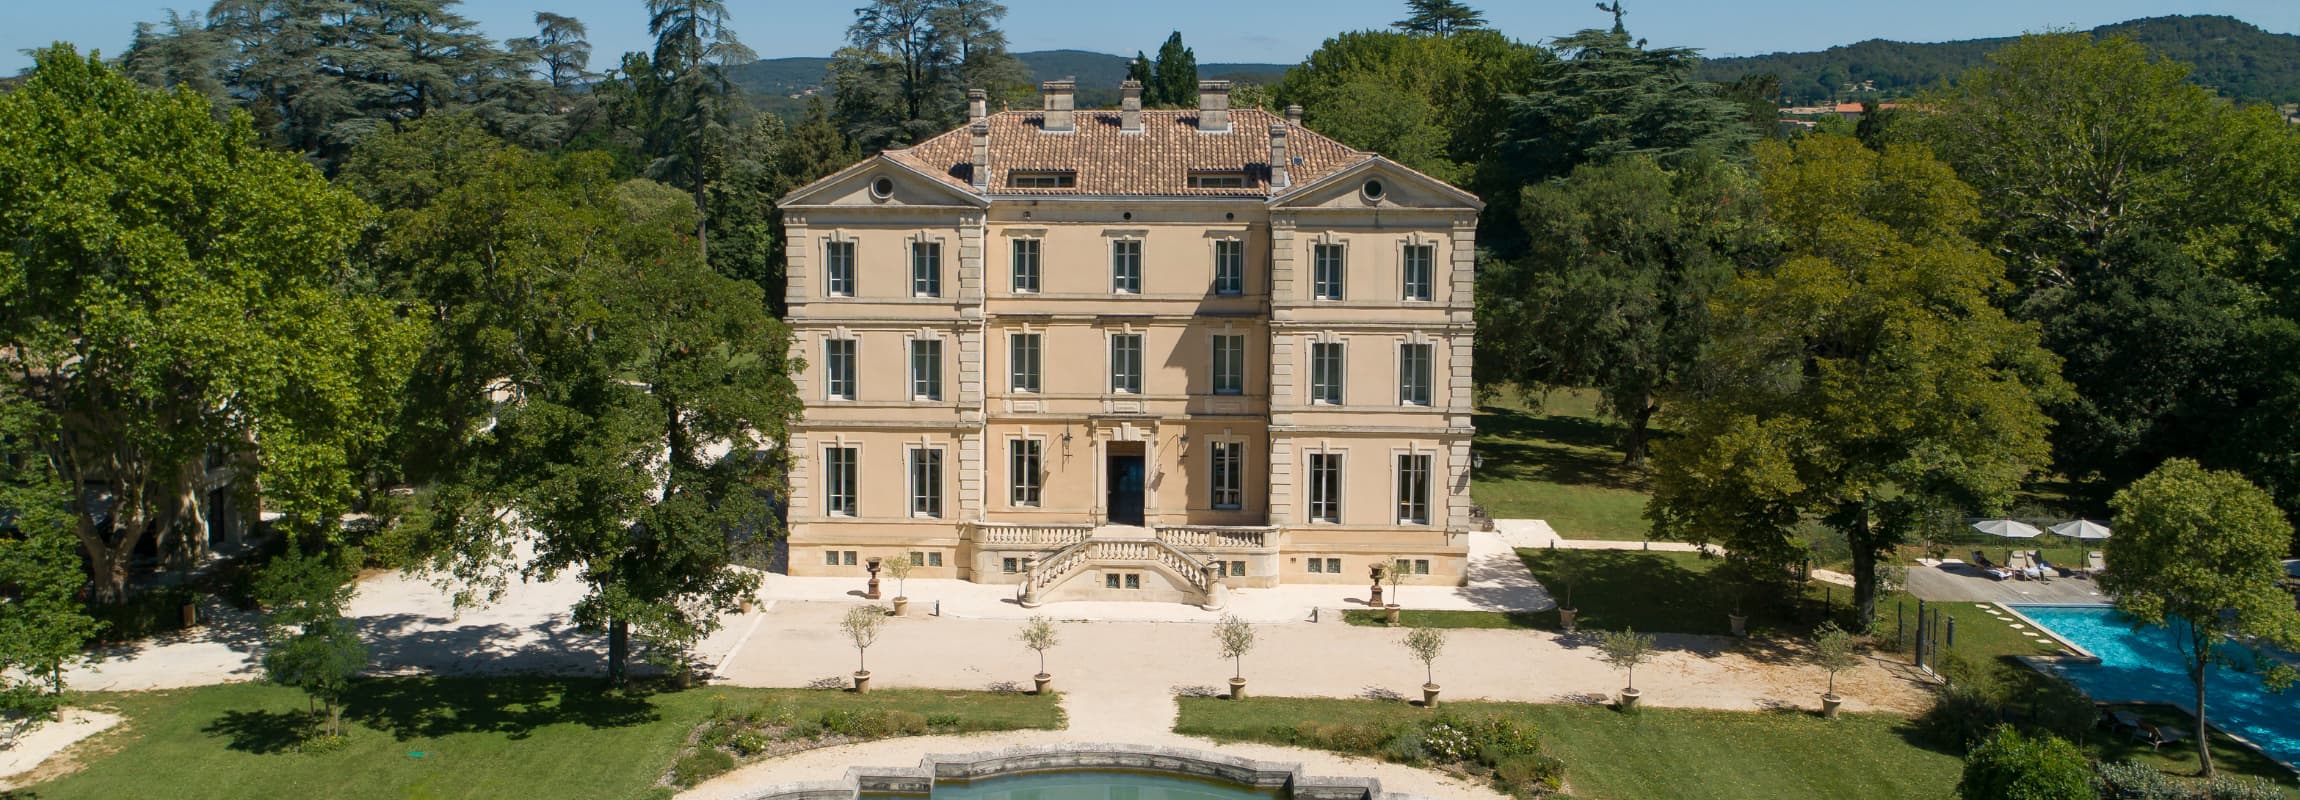 Droneview of the Château de Montcaud, hotel Provence France